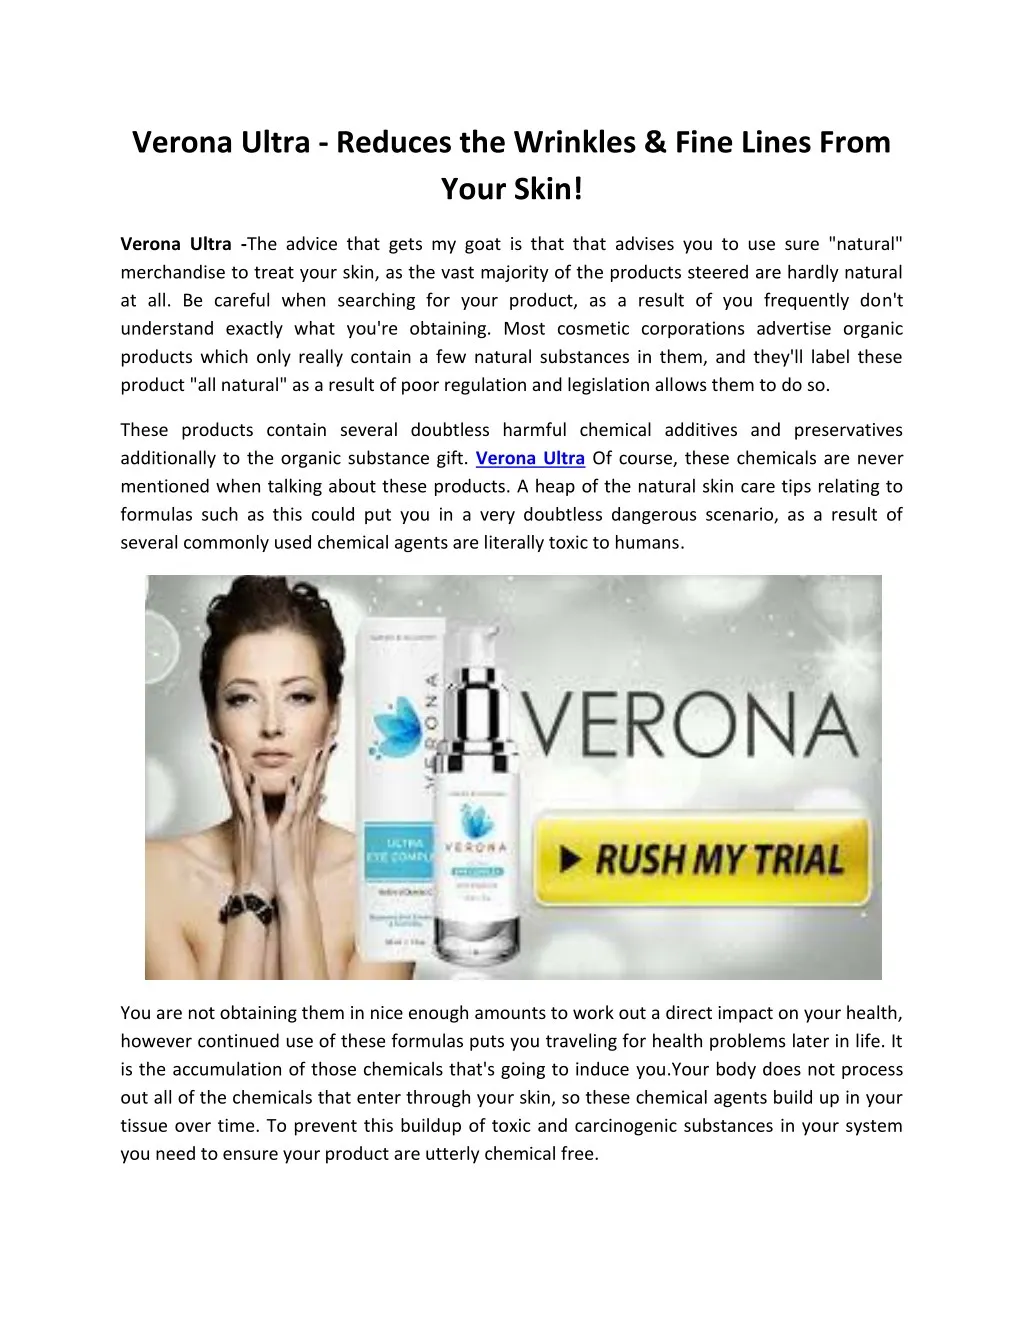 verona ultra reduces the wrinkles fine lines from